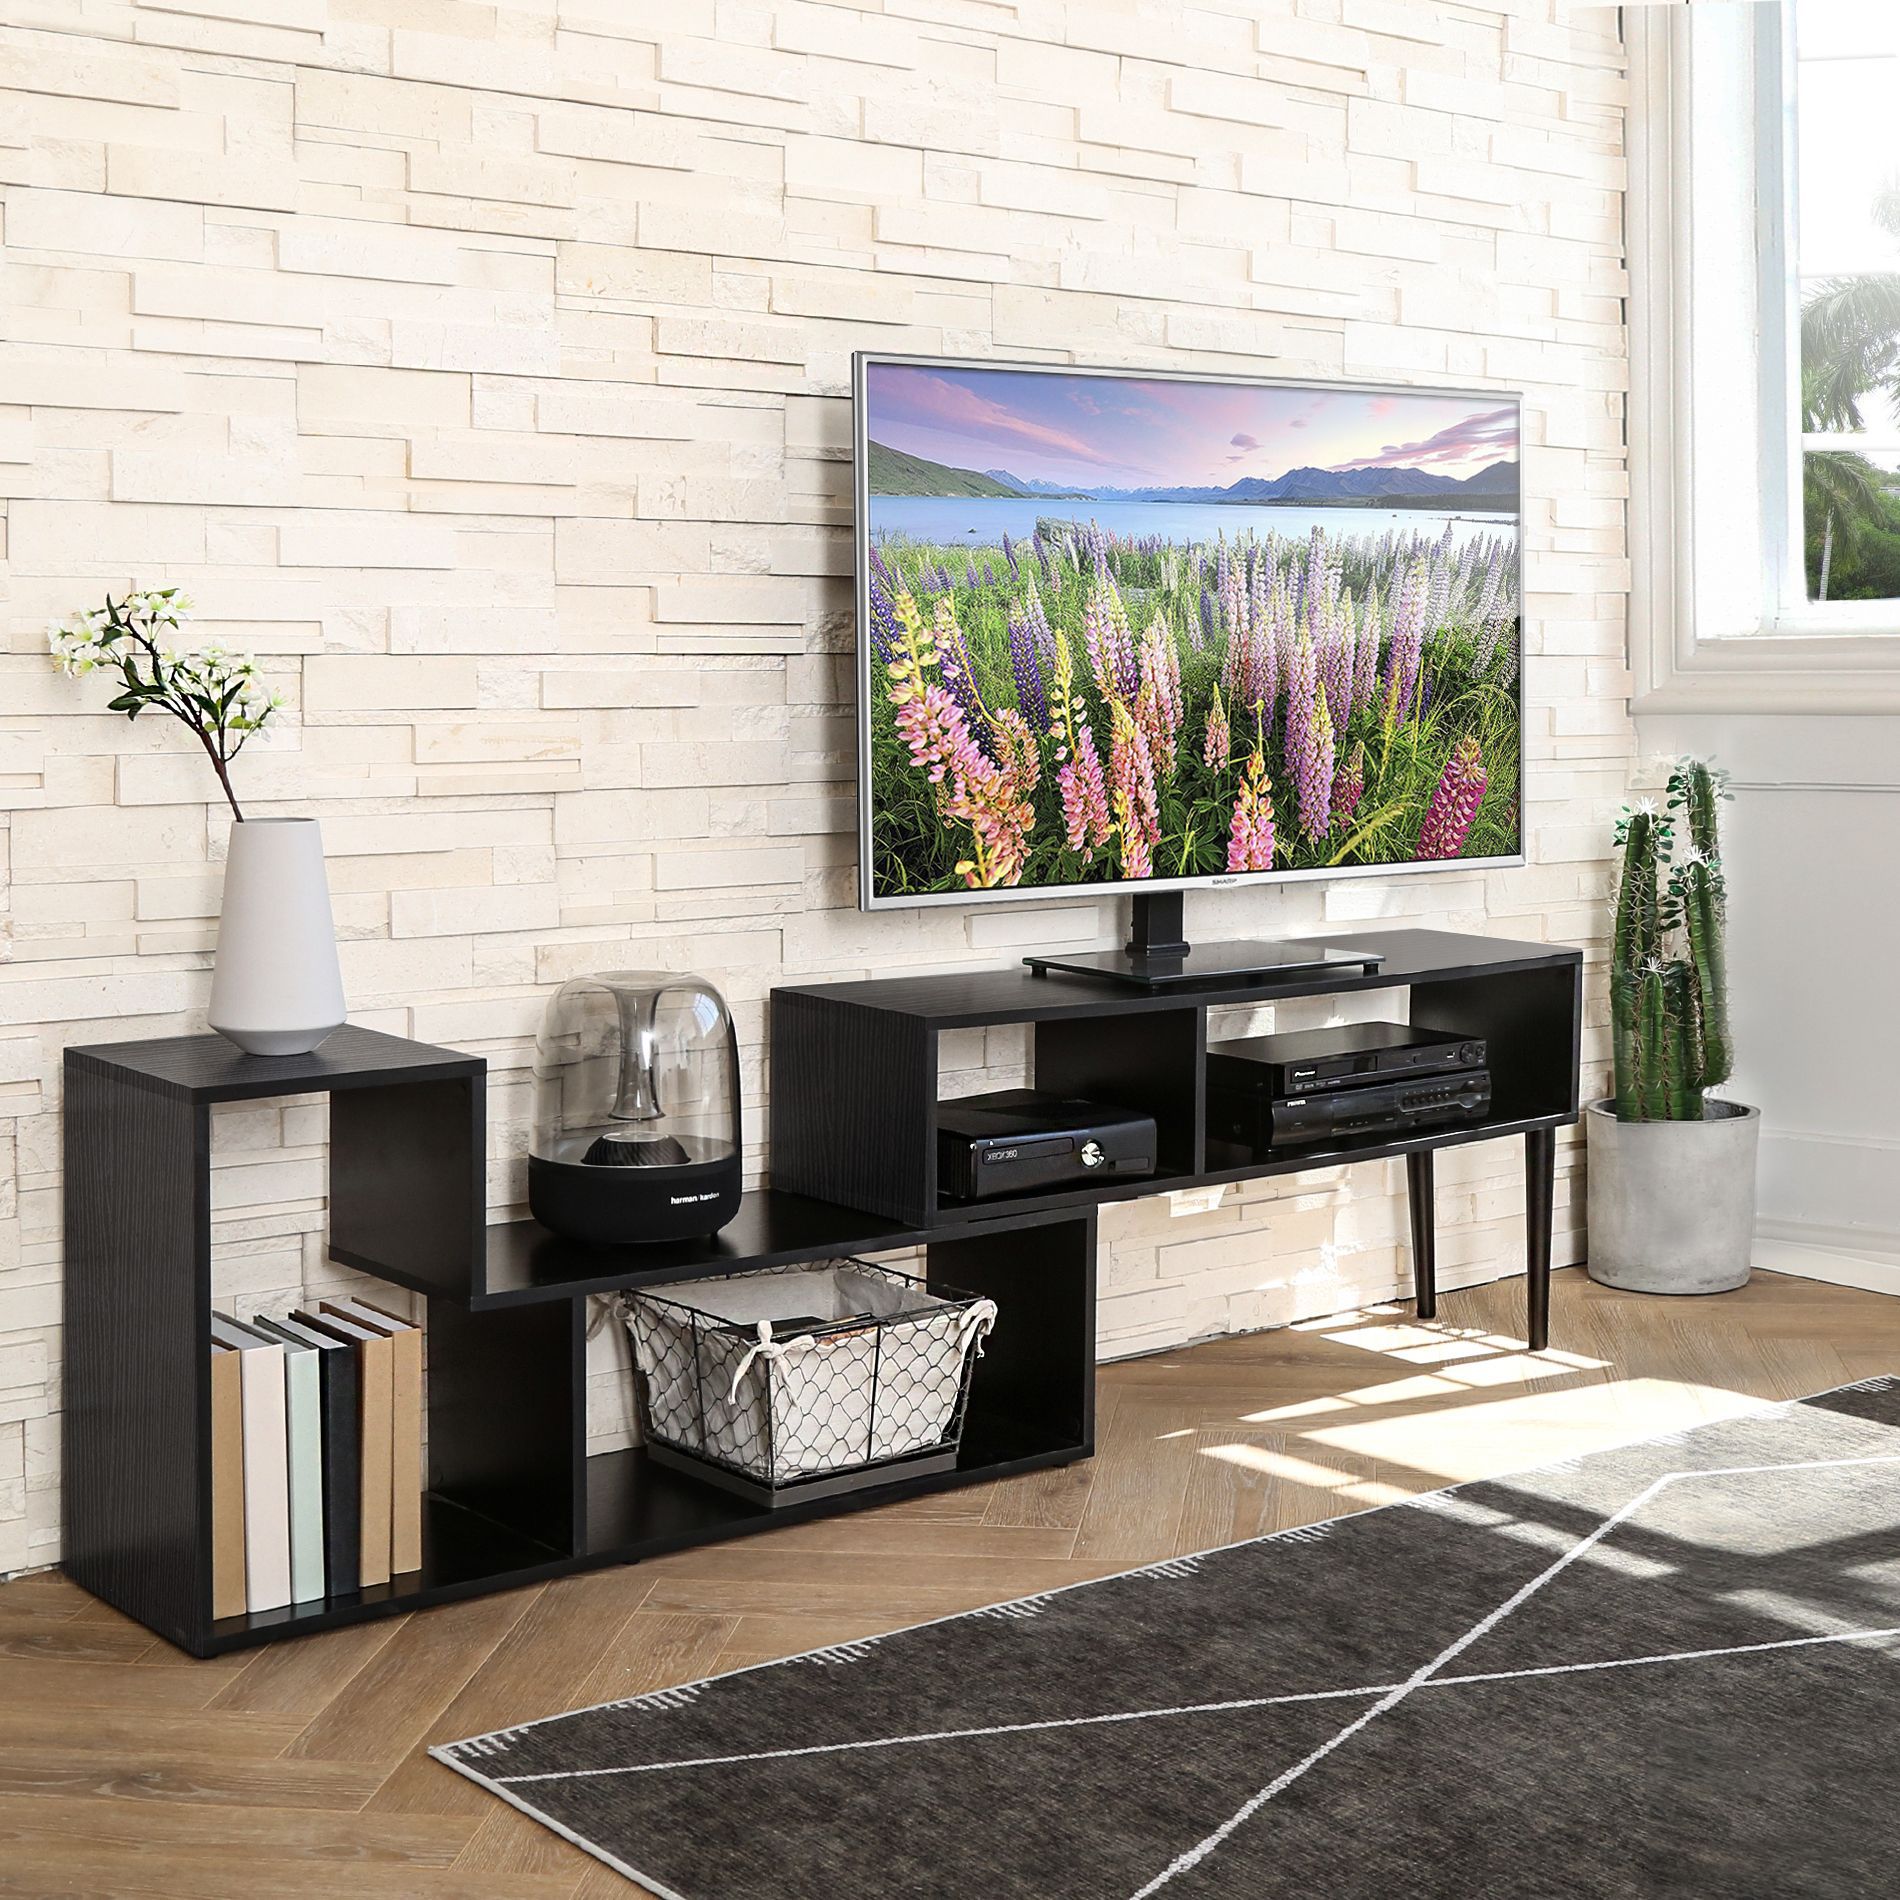 FITUEYES TV Stand, Entertainment Center,TV Console, Office Table Mid-Century Modern TV Stand for Flat Screen TV Cable Box Gaming Consoles, in Living Room Entertainment Room Office TS213601WB - image 1 of 7